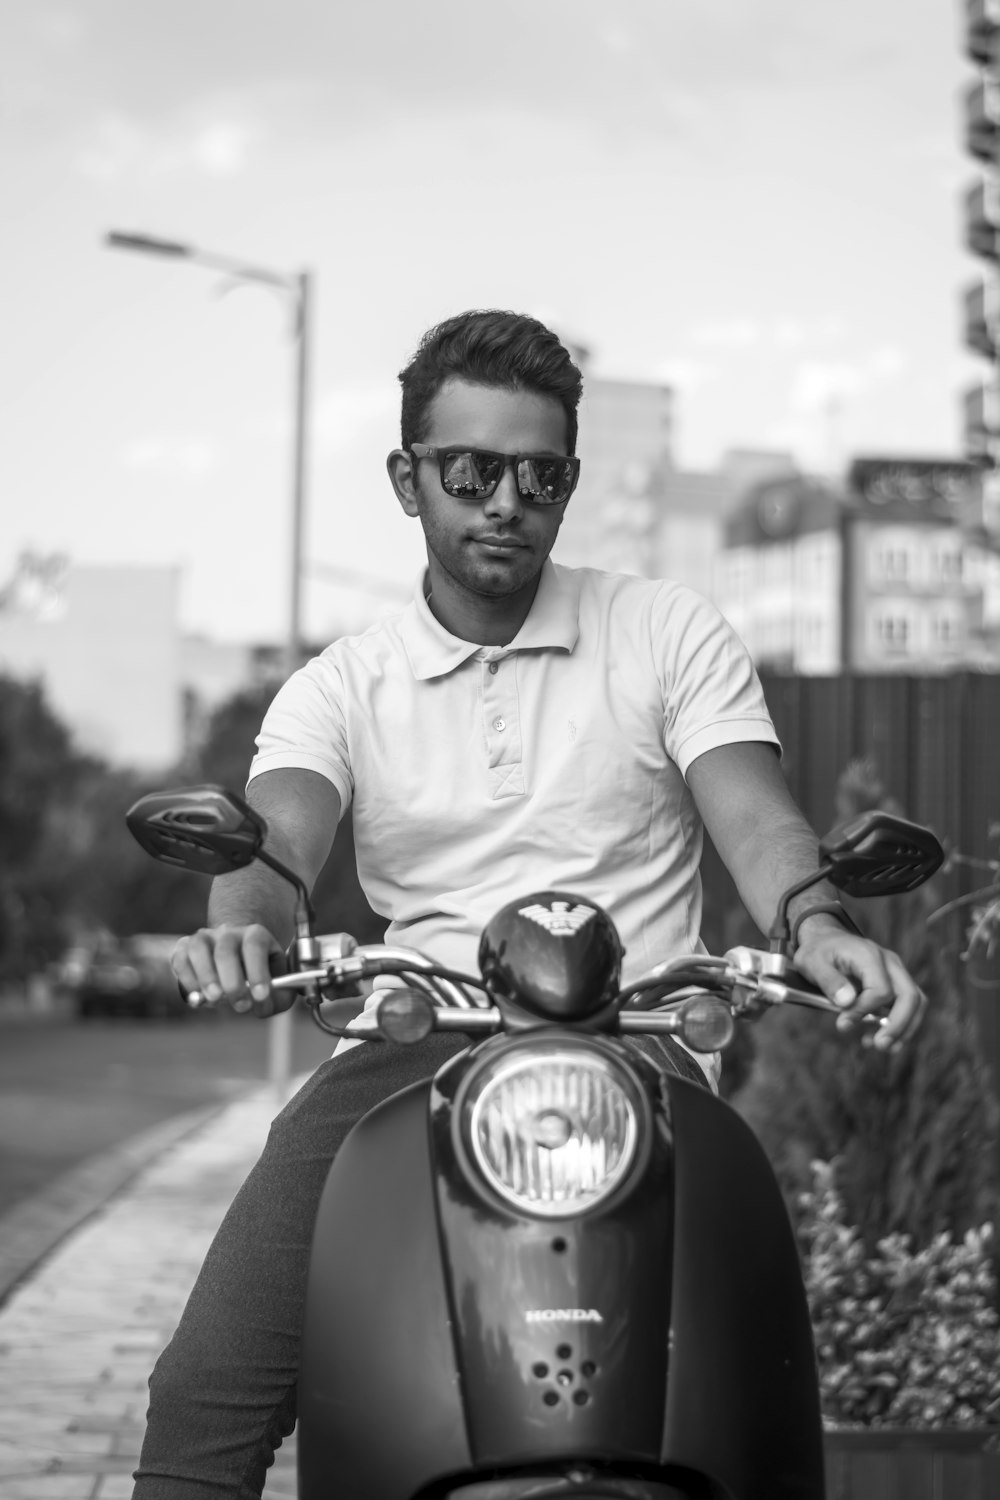 man in white crew neck t-shirt riding red motorcycle